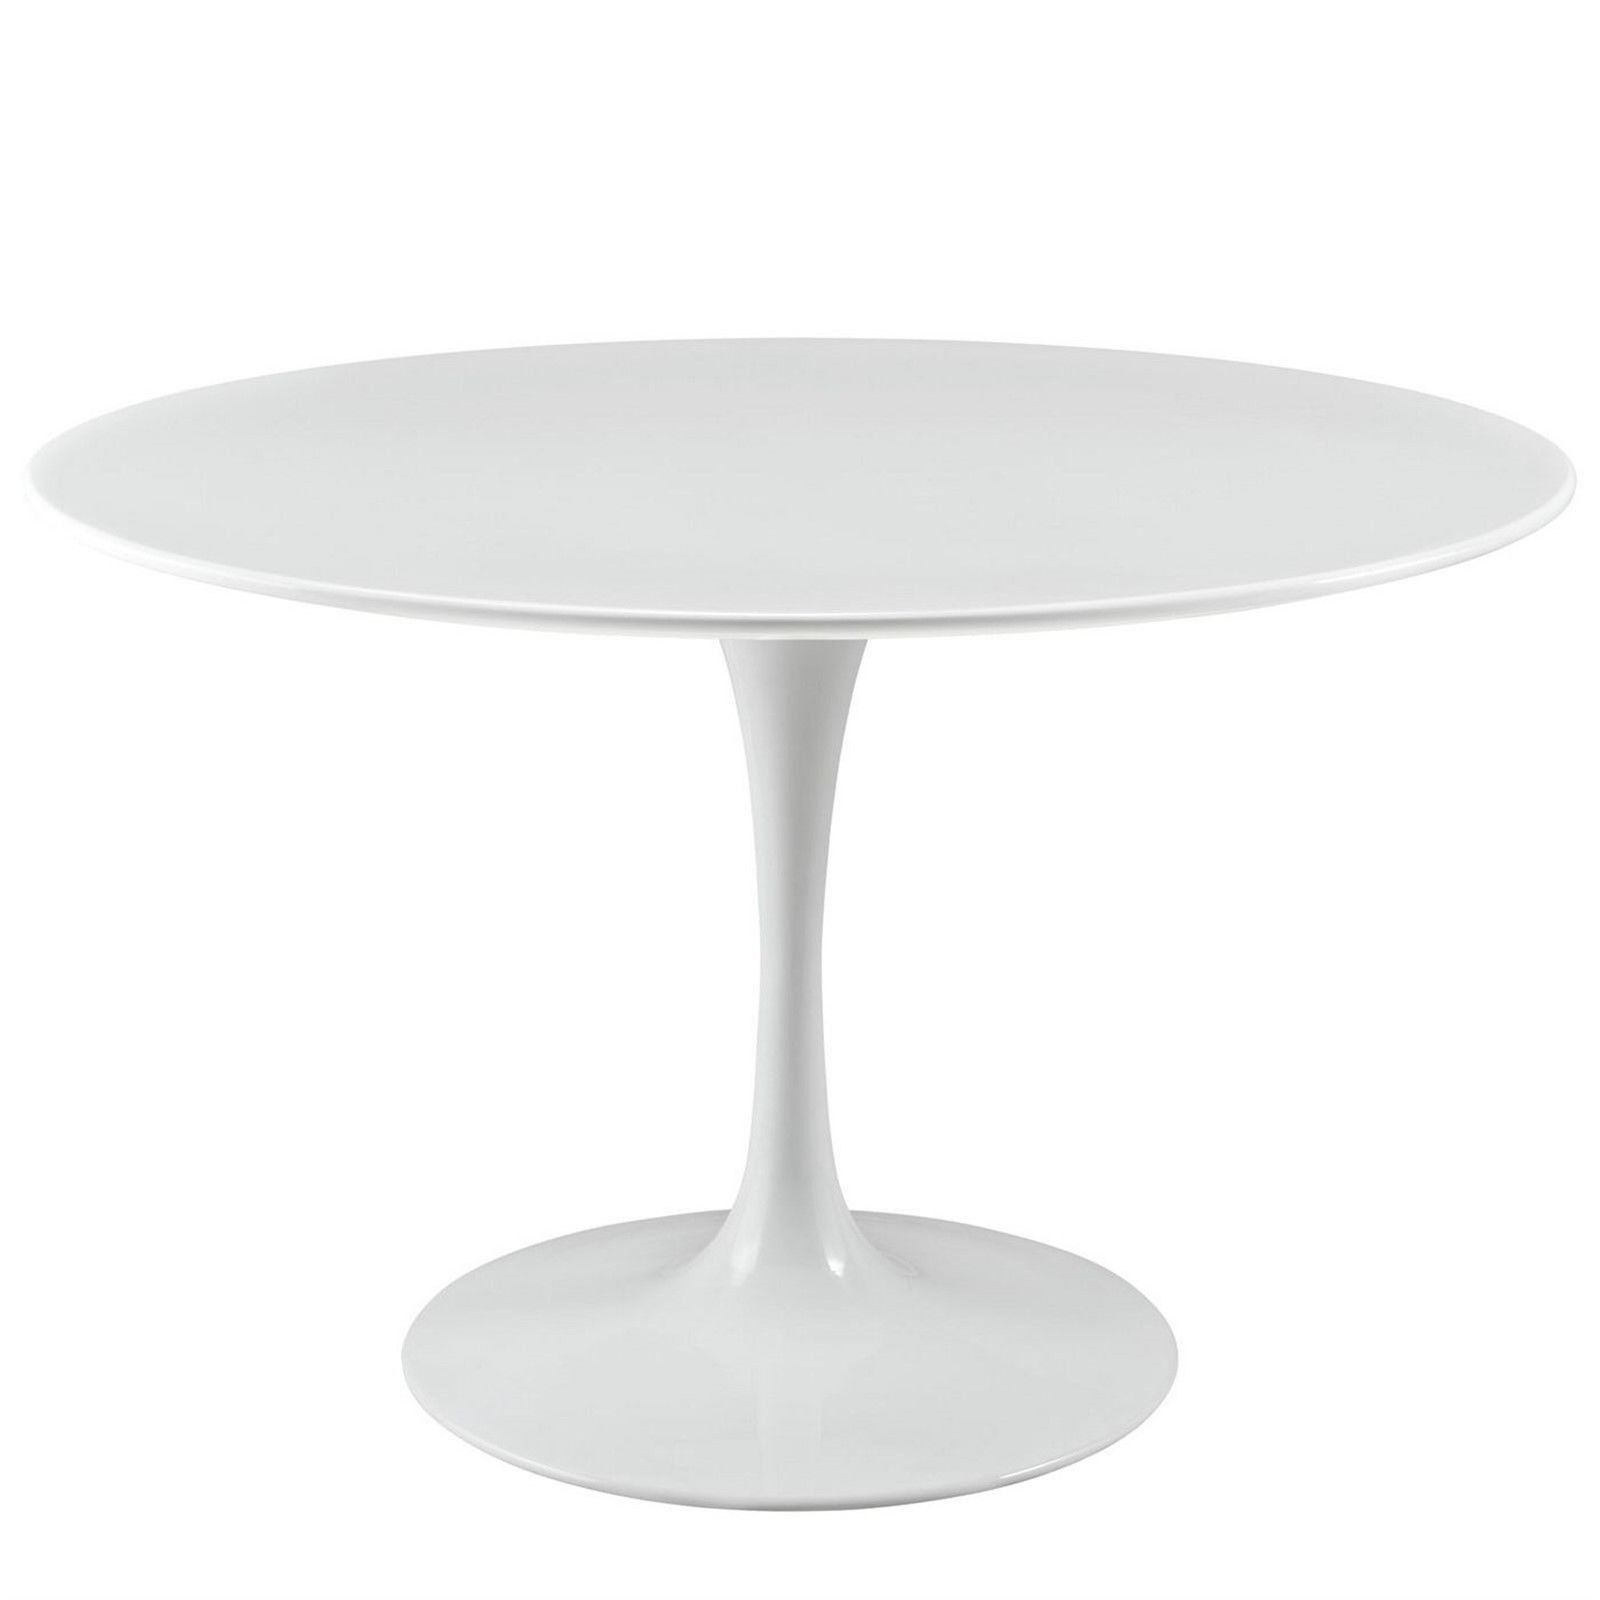 Photo 1 of Modway Mid-Century Modern Dining Table with Round Top and Pedestal Base in White